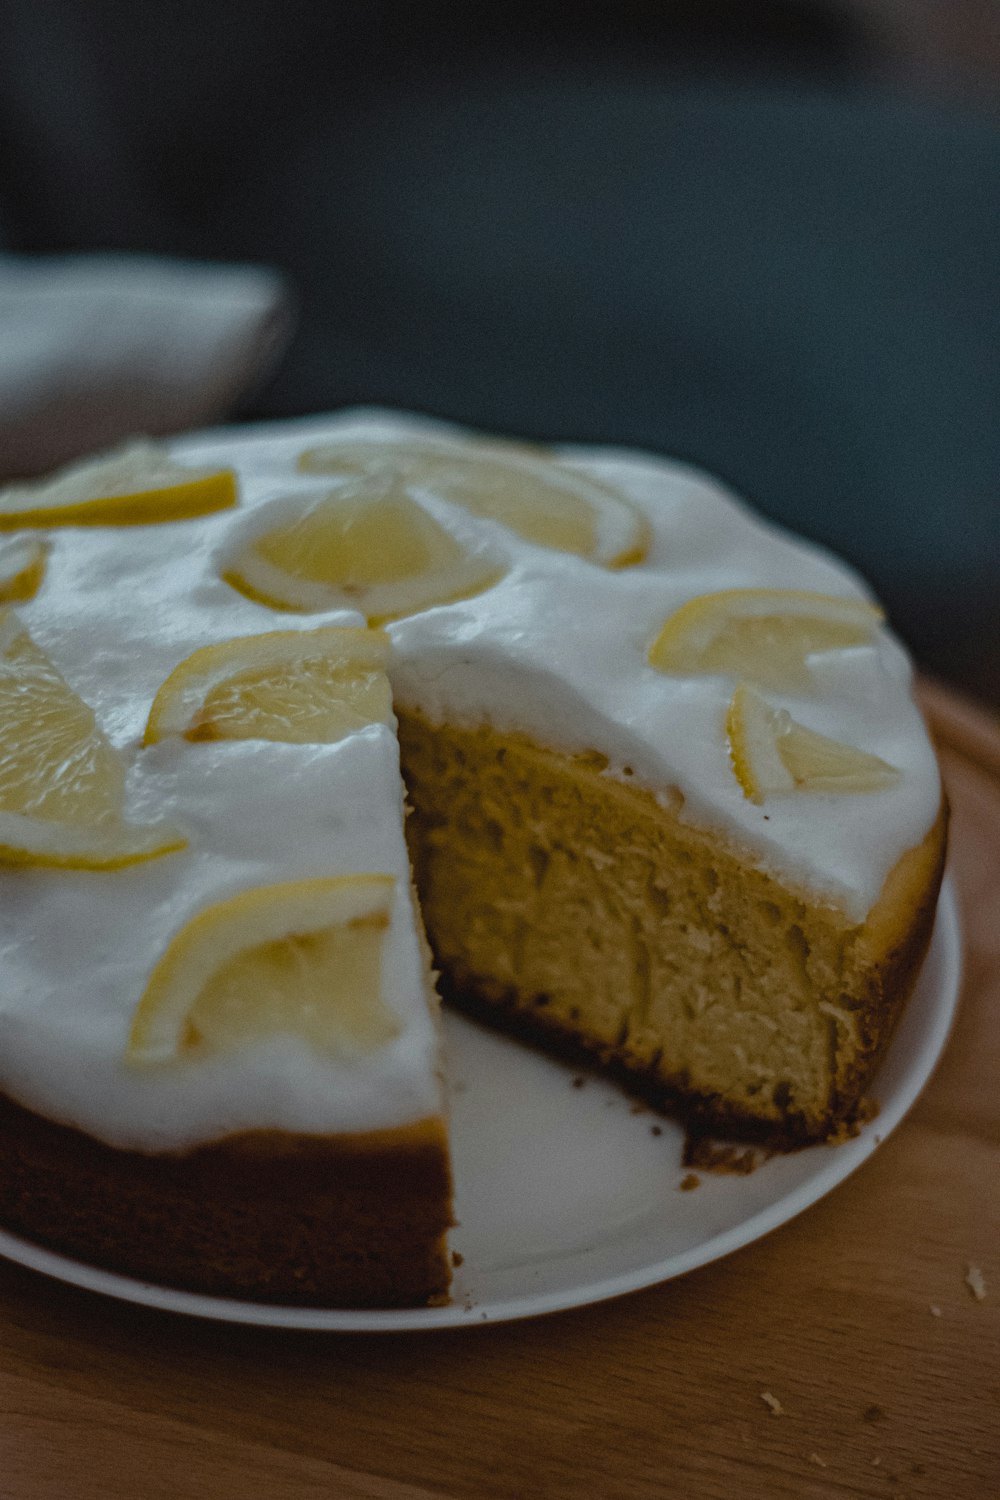 a slice of cake with oranges on top